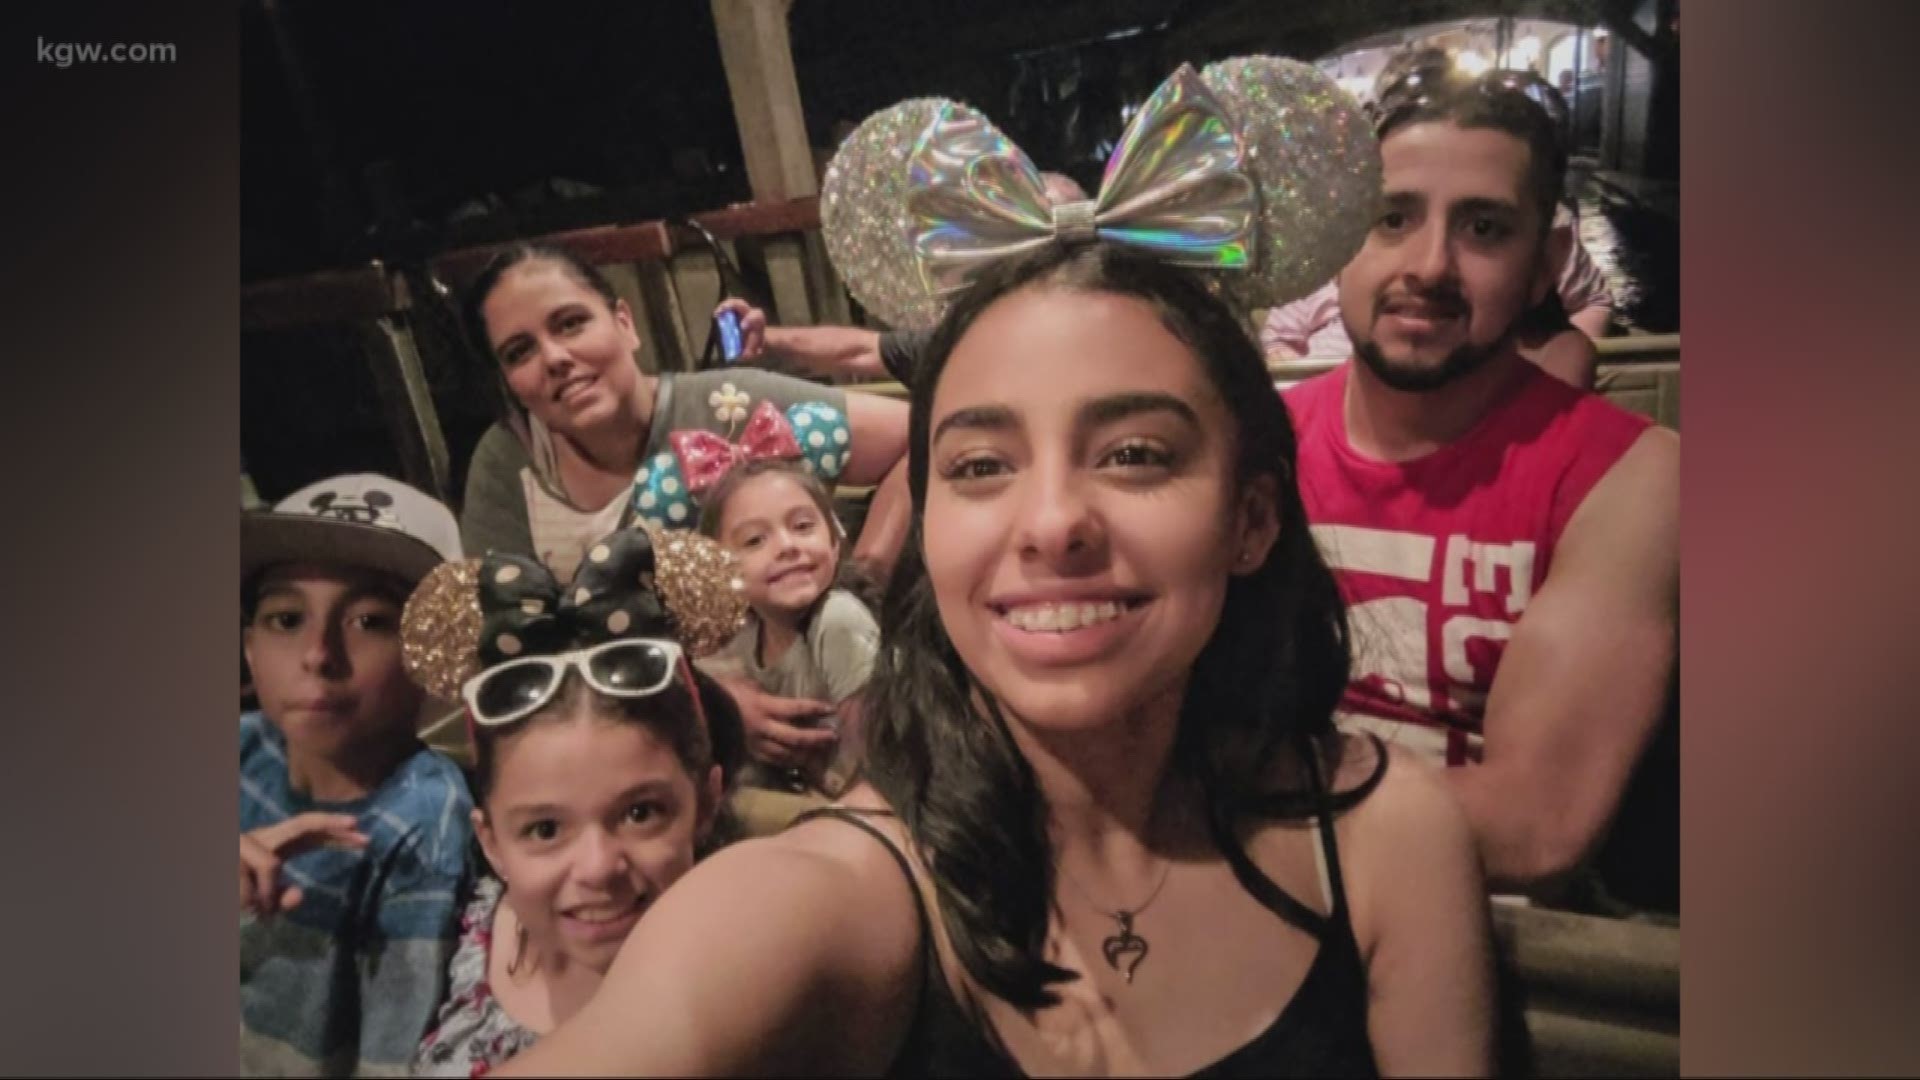 The aftermath and aftershocks in California are dominating headlines, but for Oregon mom Jessica Gonzalez and her family the experience is more than a news story.